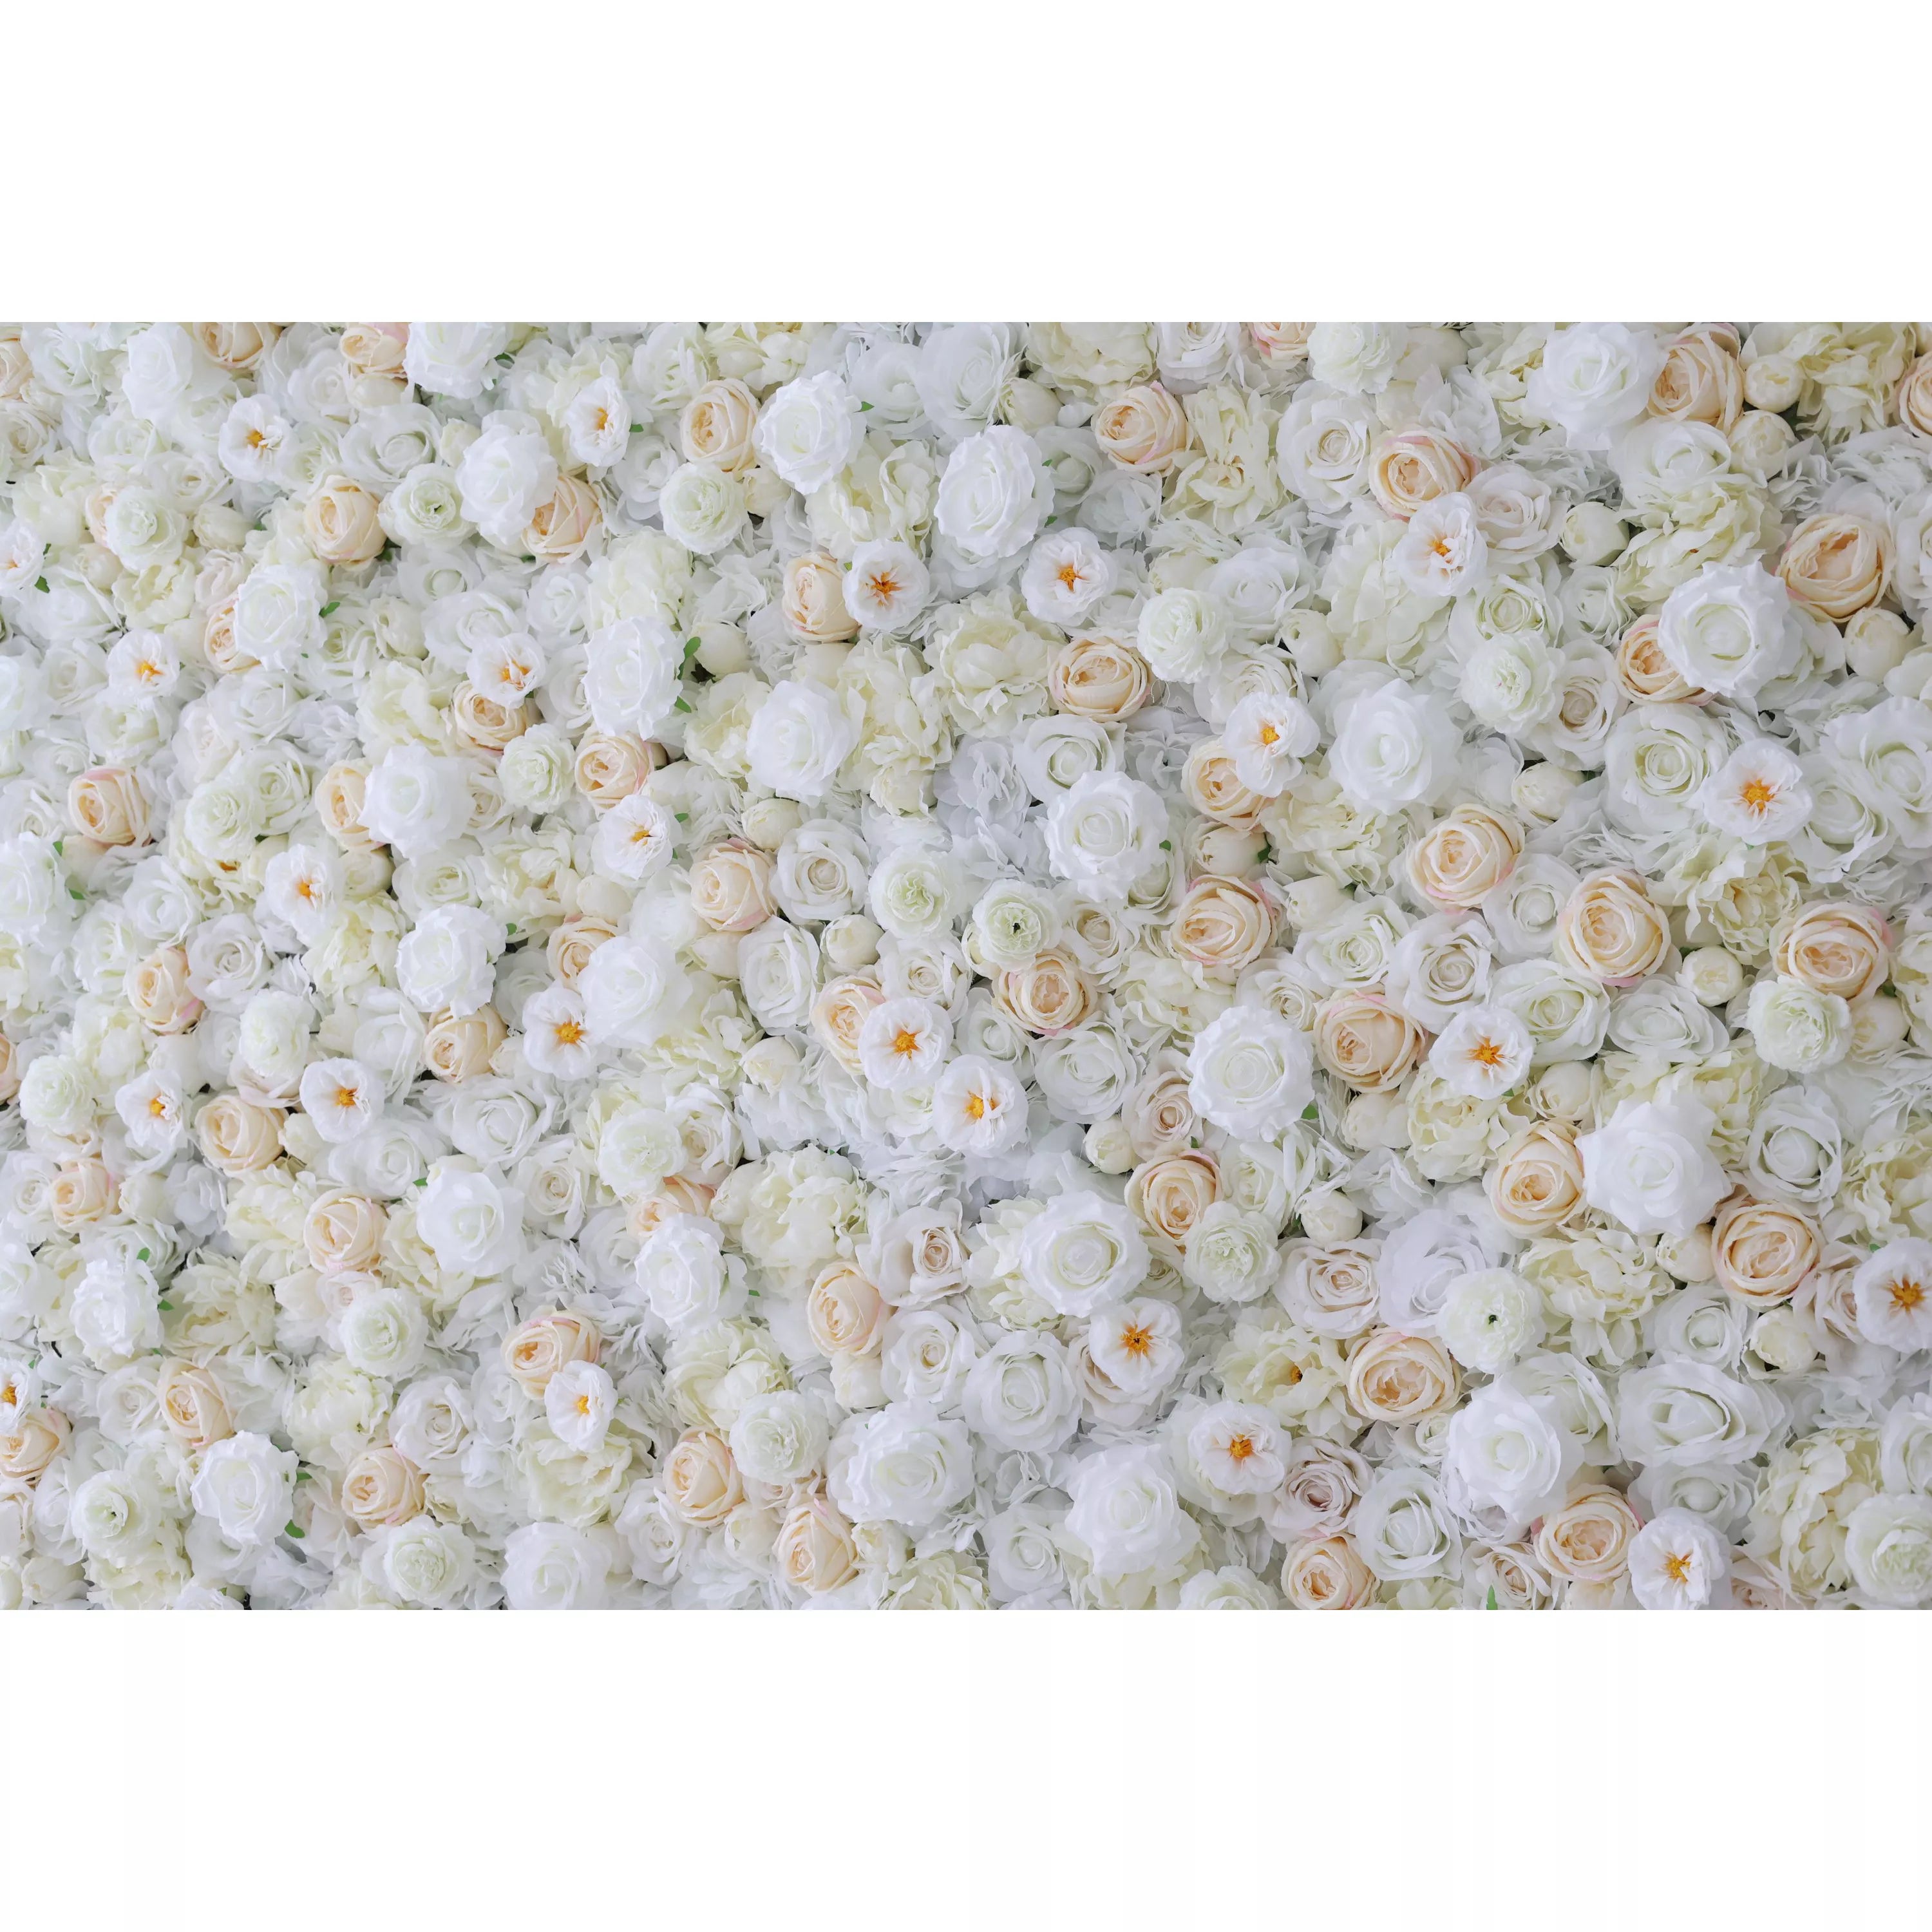 Valar Flowers Roll Up Fabric Artificial White, Cream and Champagne Flower Wall Wedding Backdrop, Floral Party Decor, Event Photography-VF-263